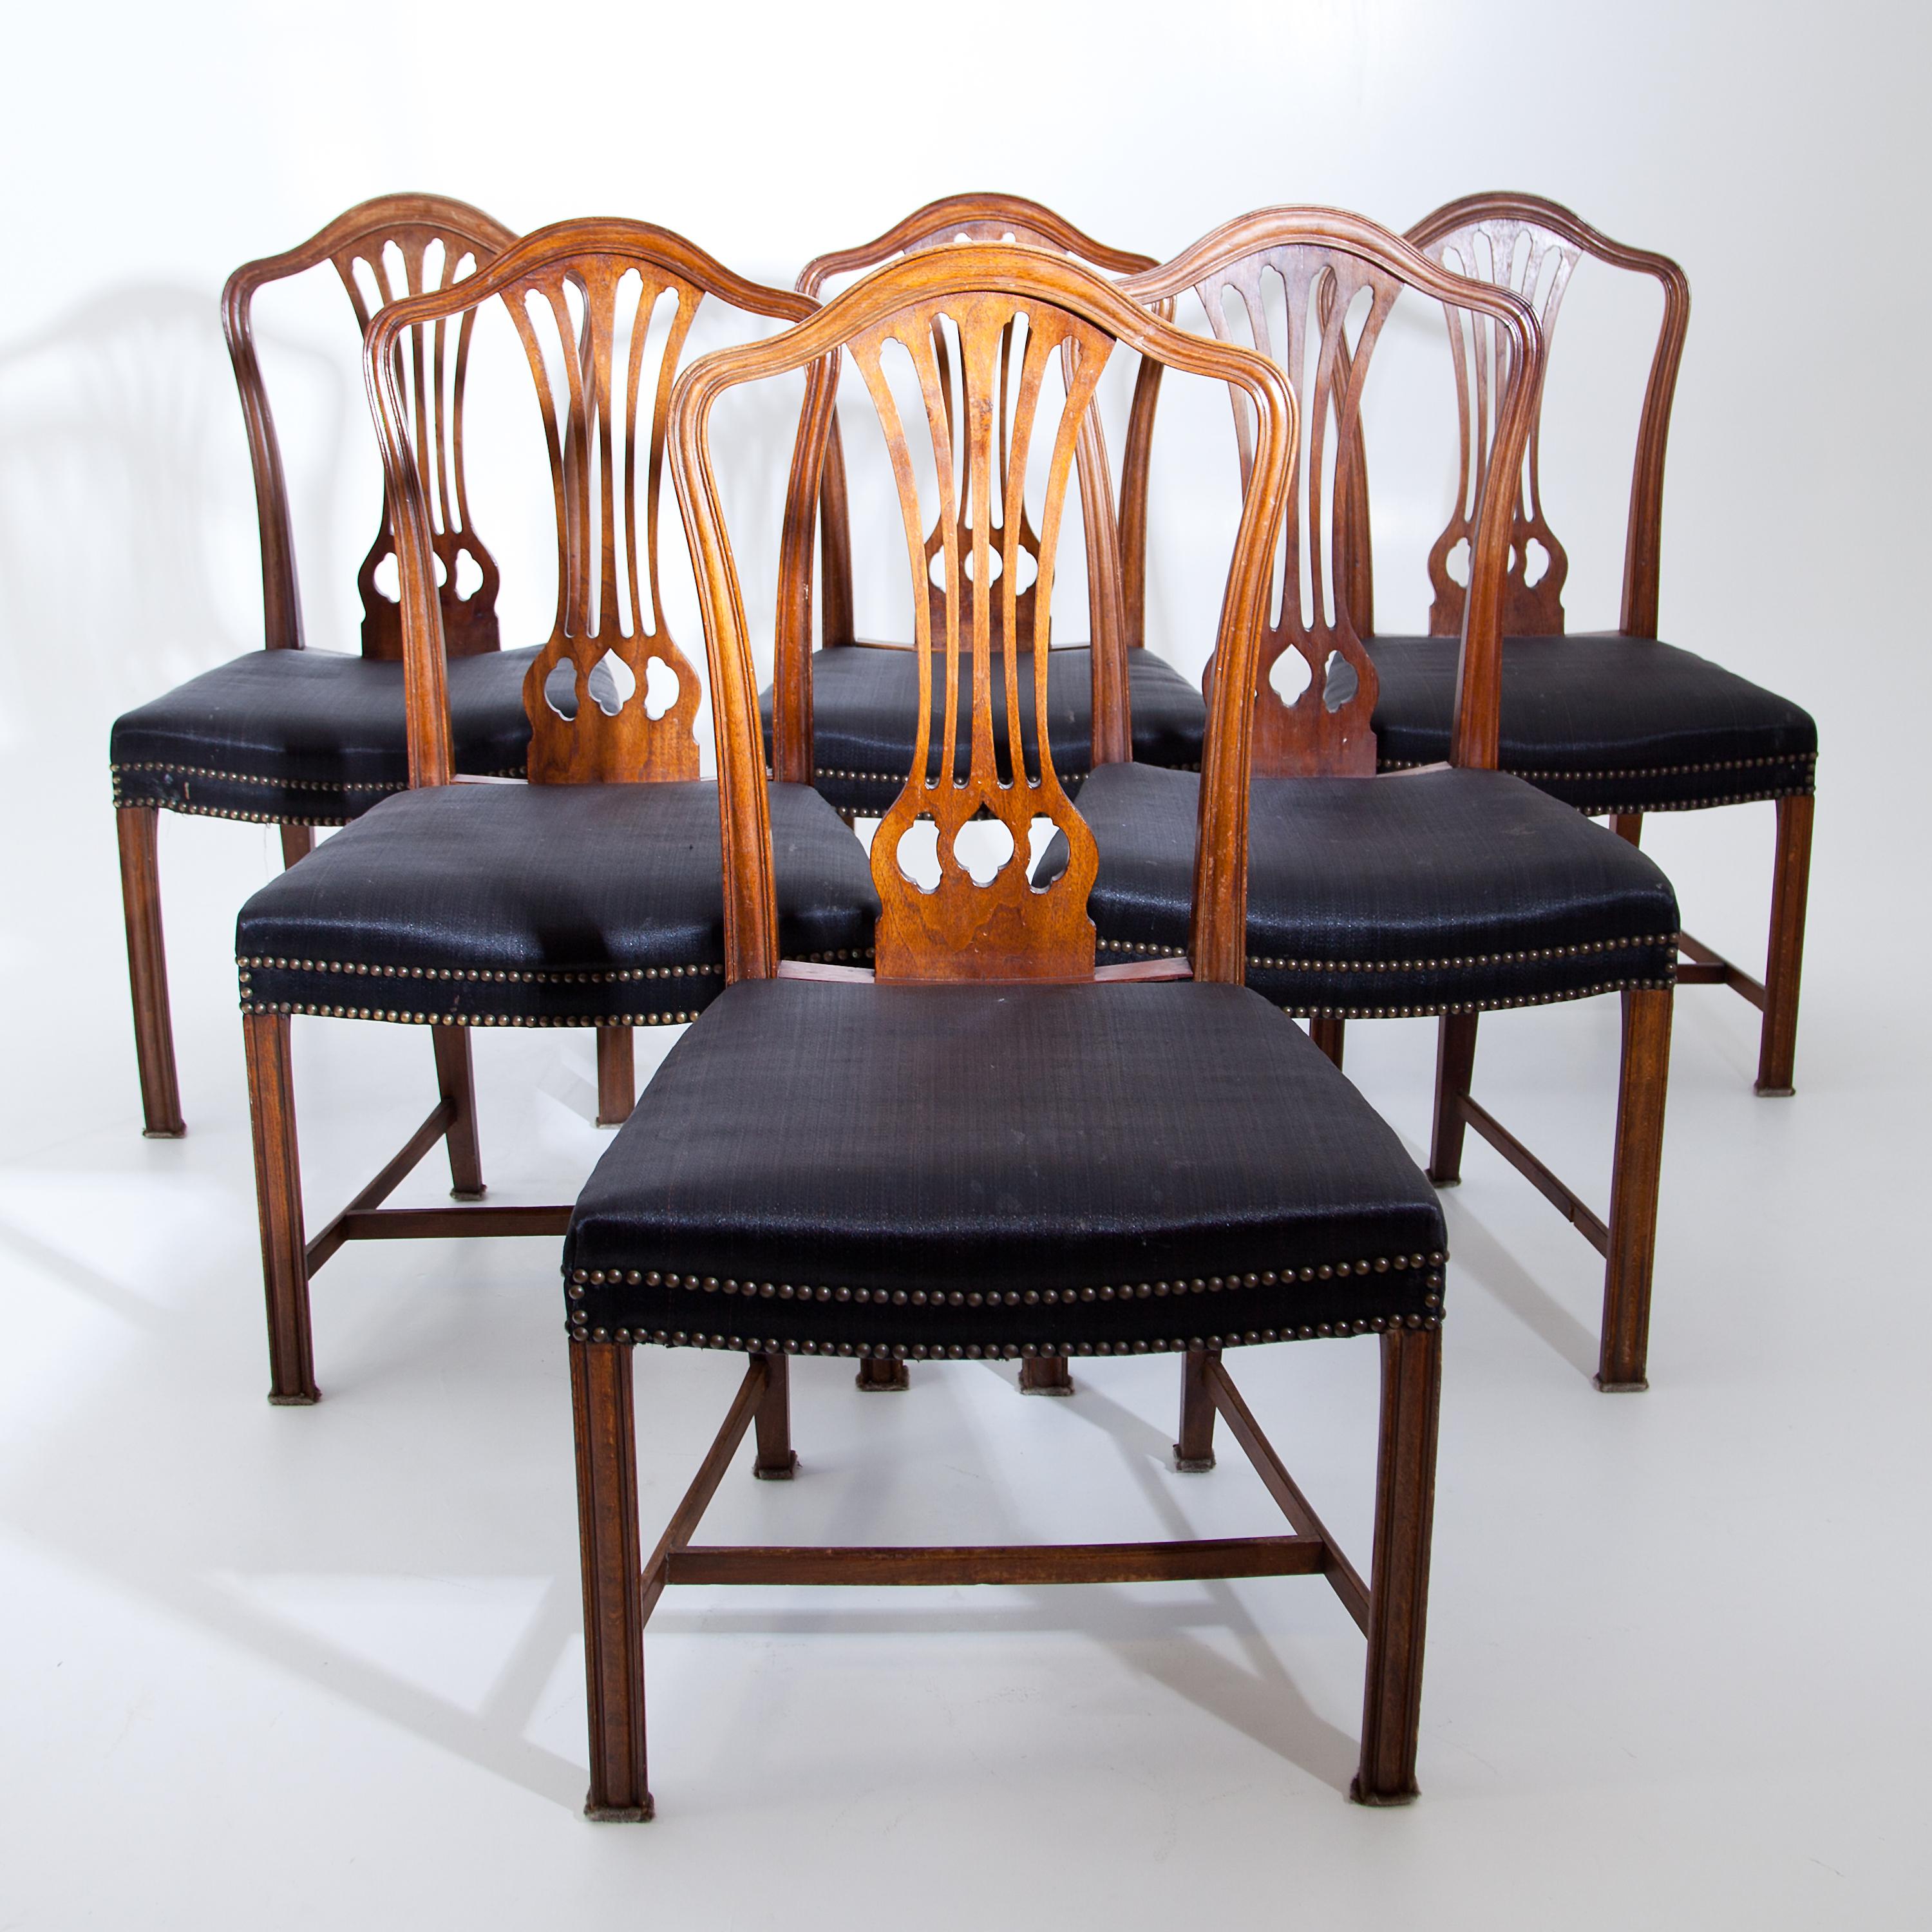 Set of six mahogany dining room chairs on straight, fluted legs at the front, and slightly flared rear legs with H-shaped strutting. The rounded backrest is decorated with a fan-shaped cut-out board. The seats are covered with black horsehair with